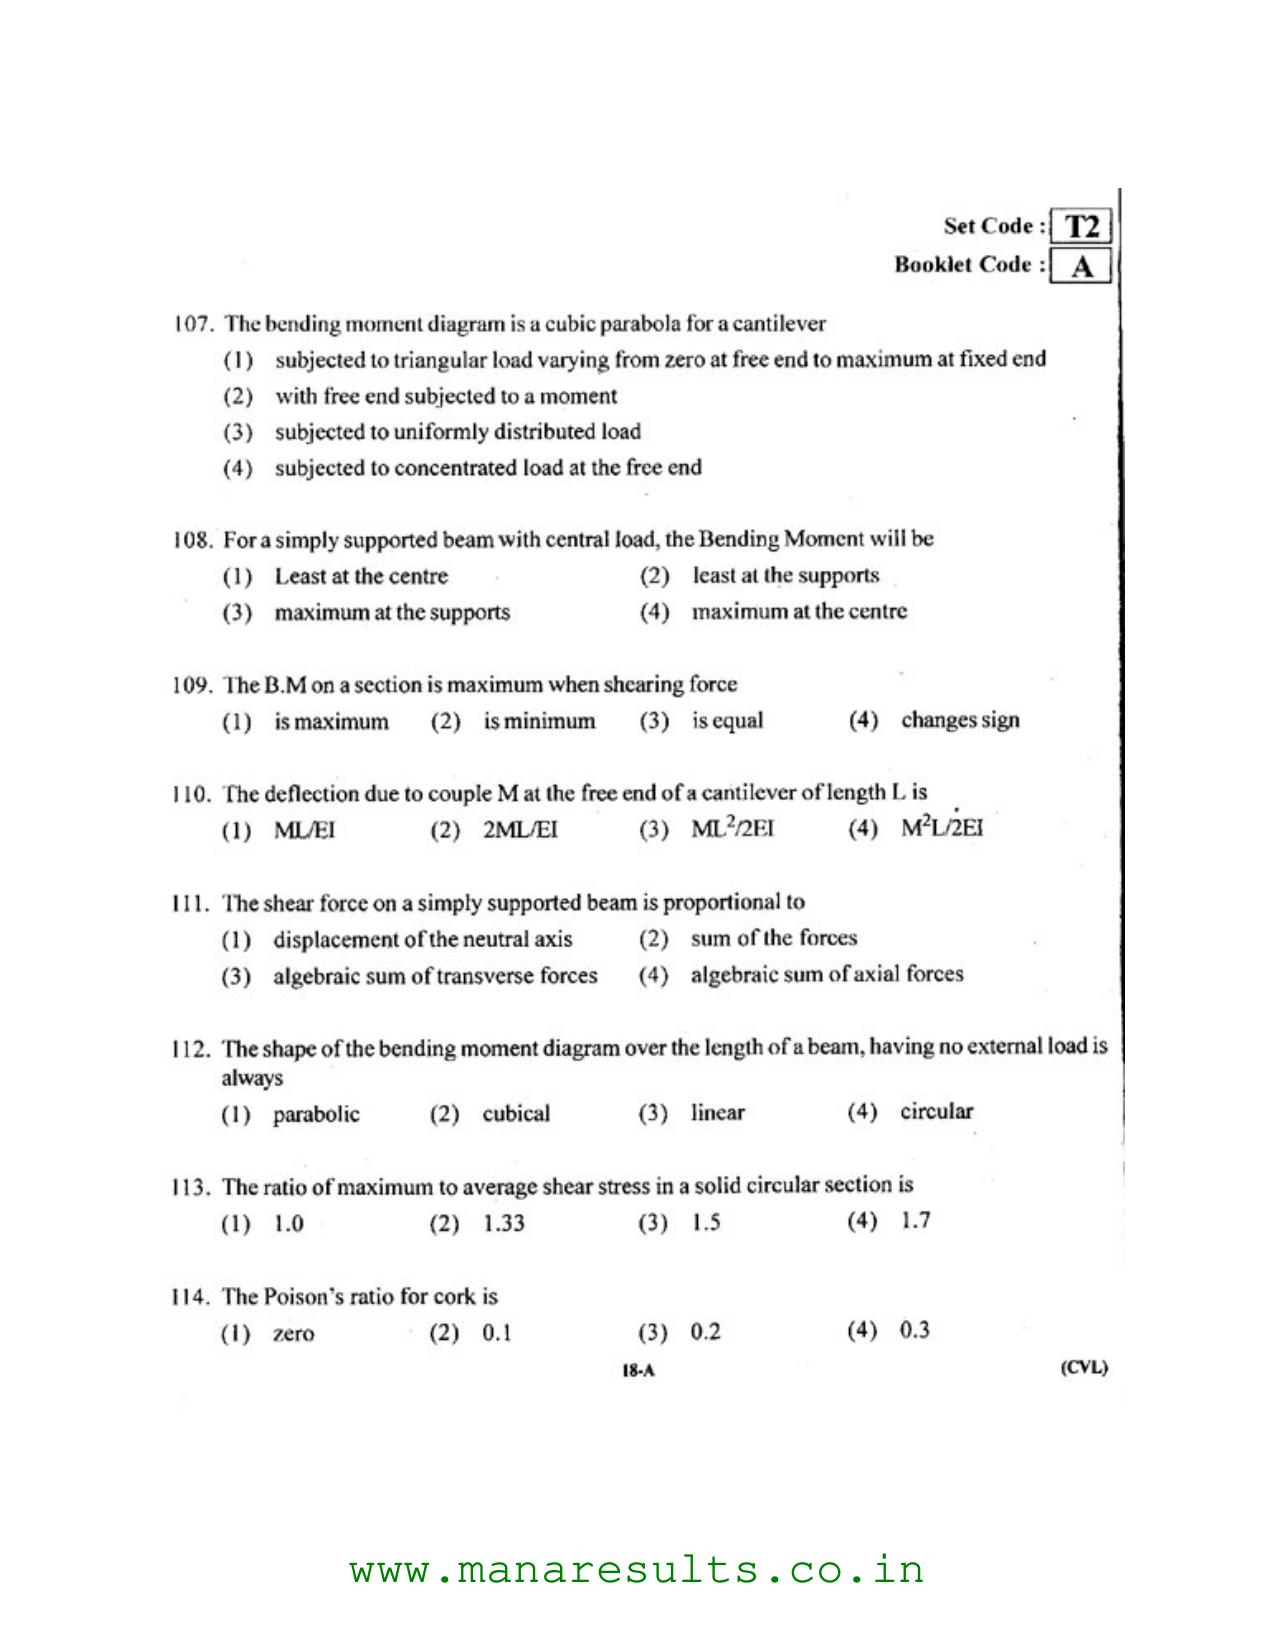 AP ECET 2016 Civil Engineering Old Previous Question Papers - Page 17